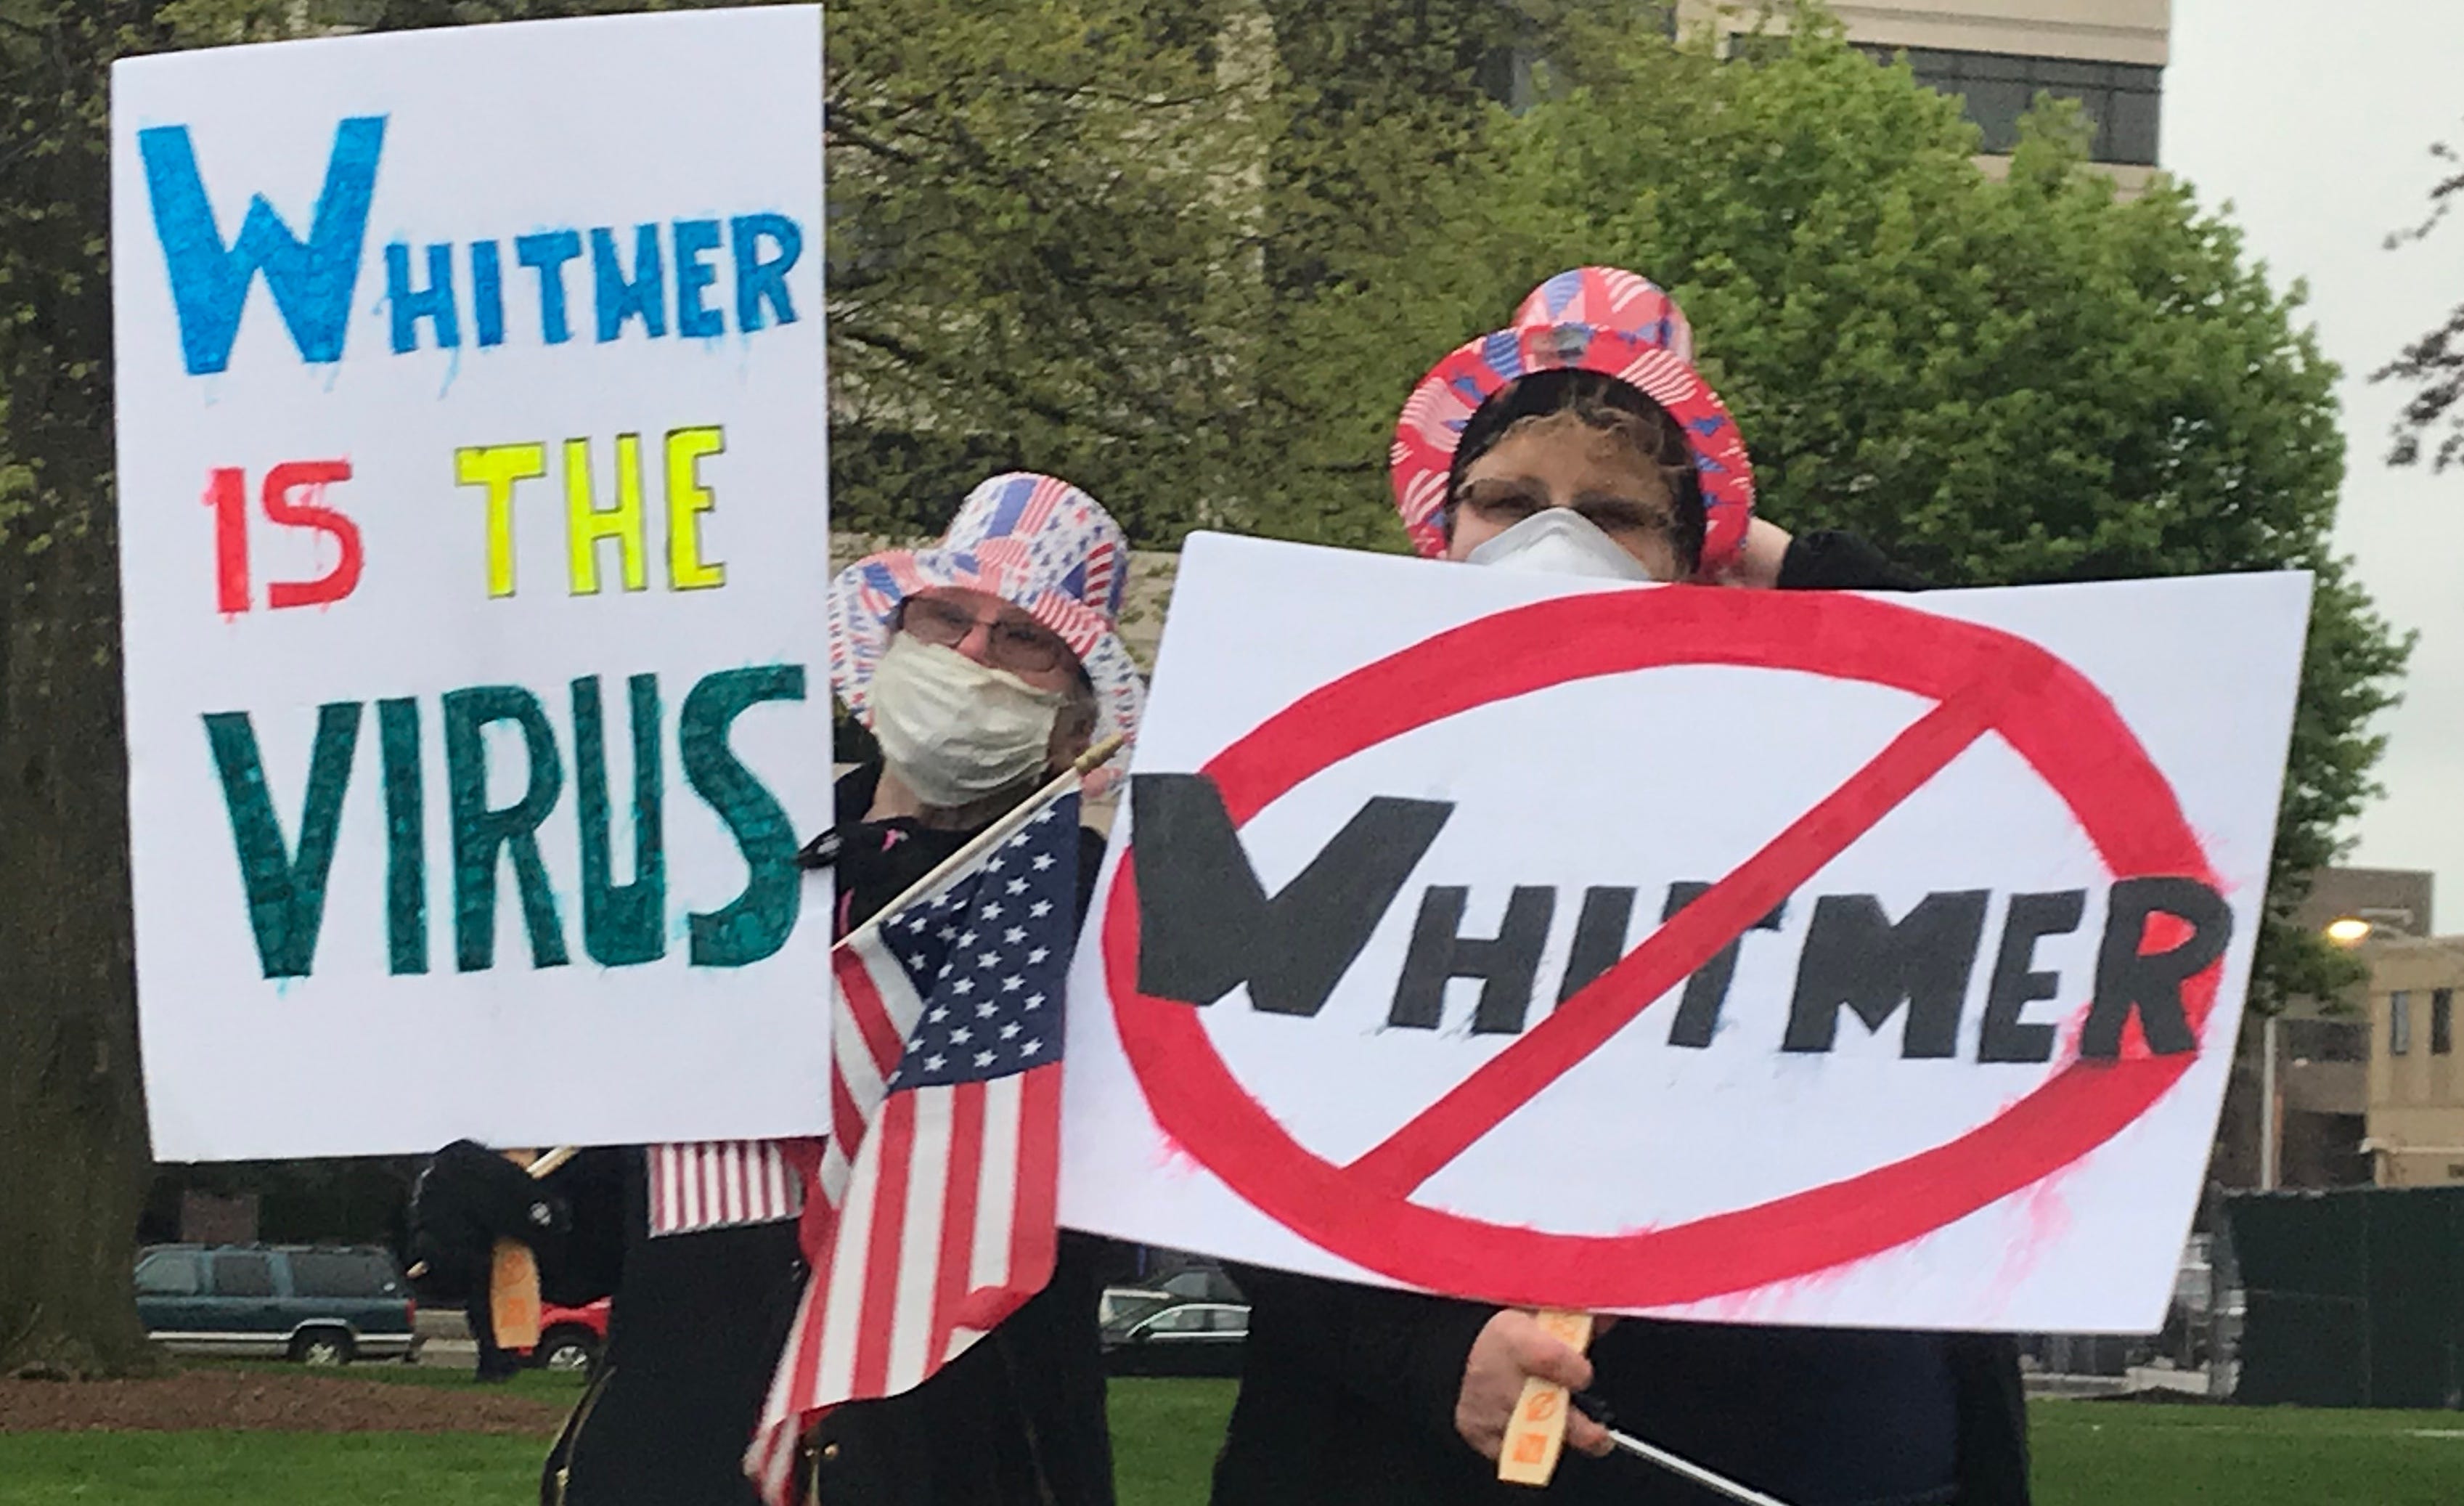 Two protesters pose for a photo outside the Michigan Capitol on Thursday, May 14, 2020, during a demonstration against COVID-19 restrictions.